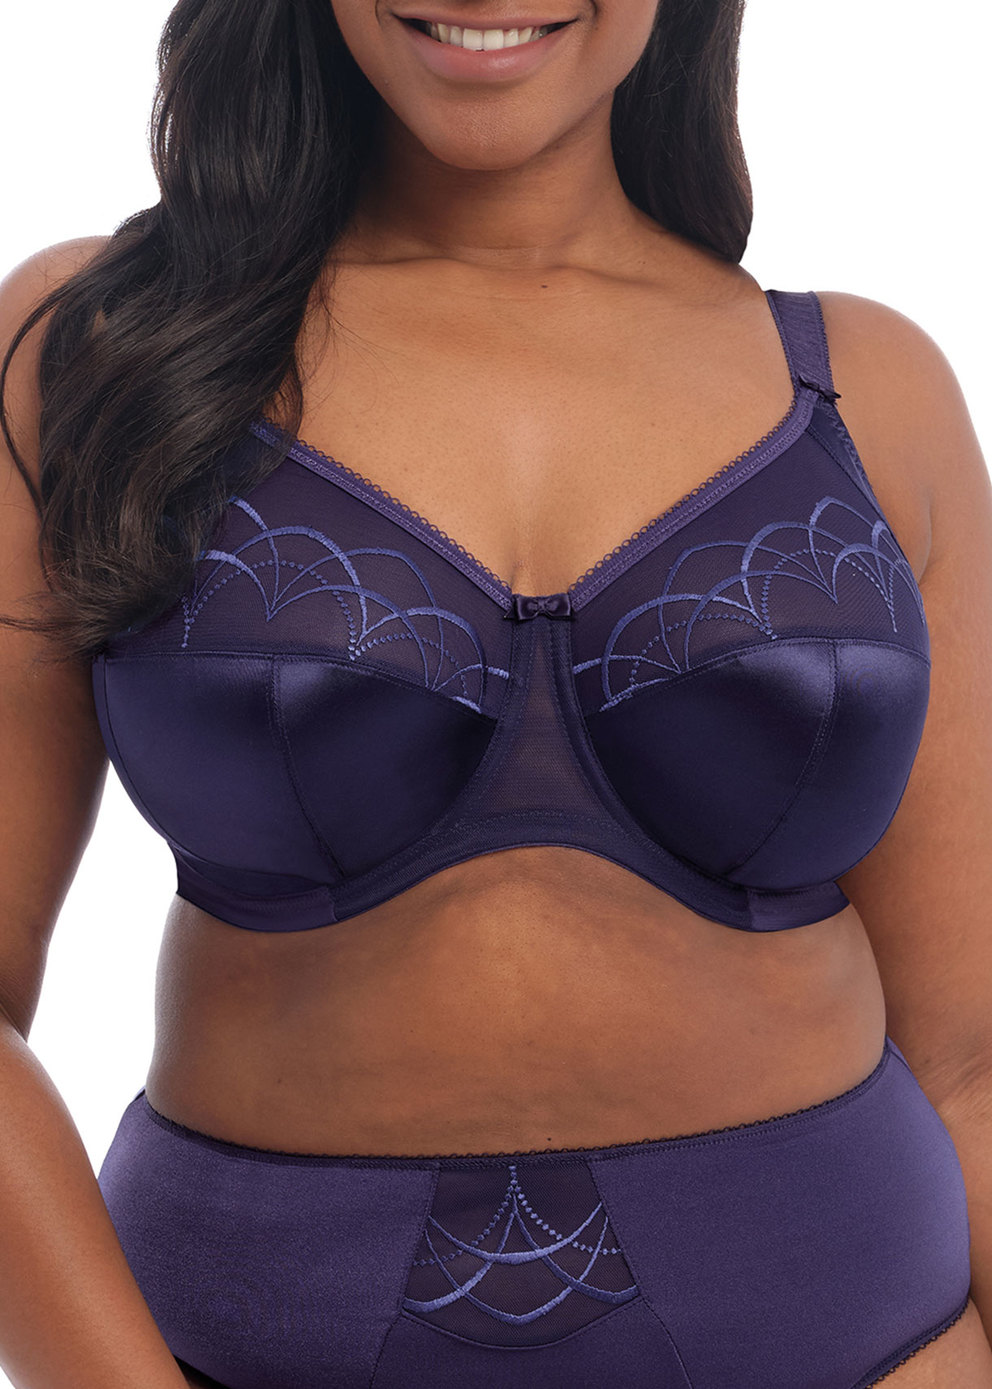 Elomi Women’s Plus Size Full-Cup Banded Bra